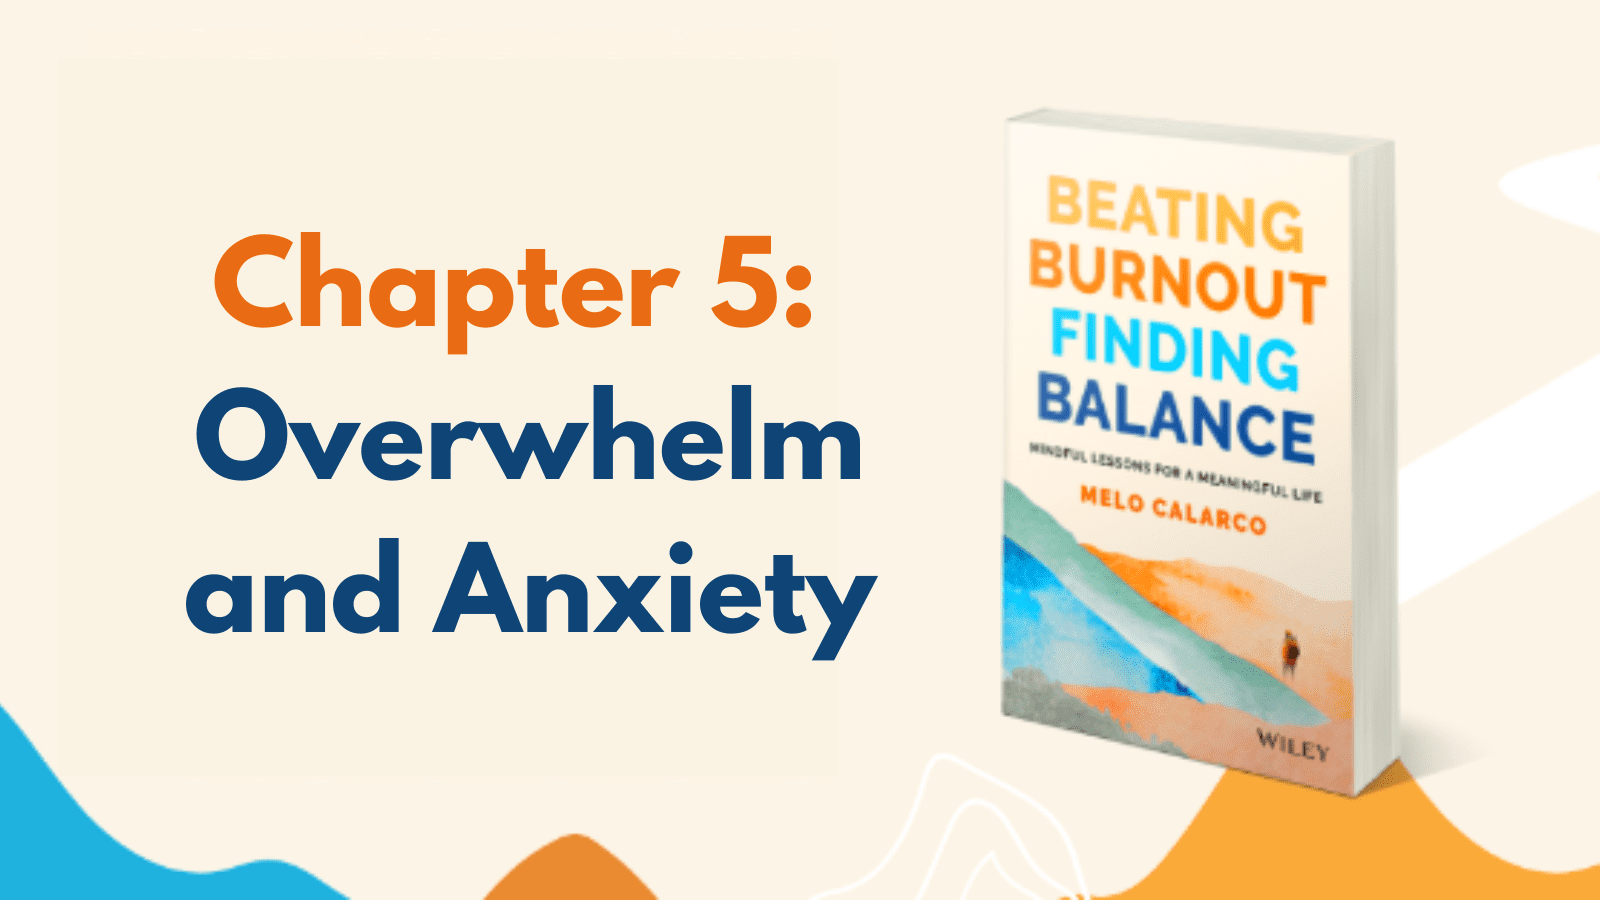 Chapter 5: Overwhelm and Anxiety